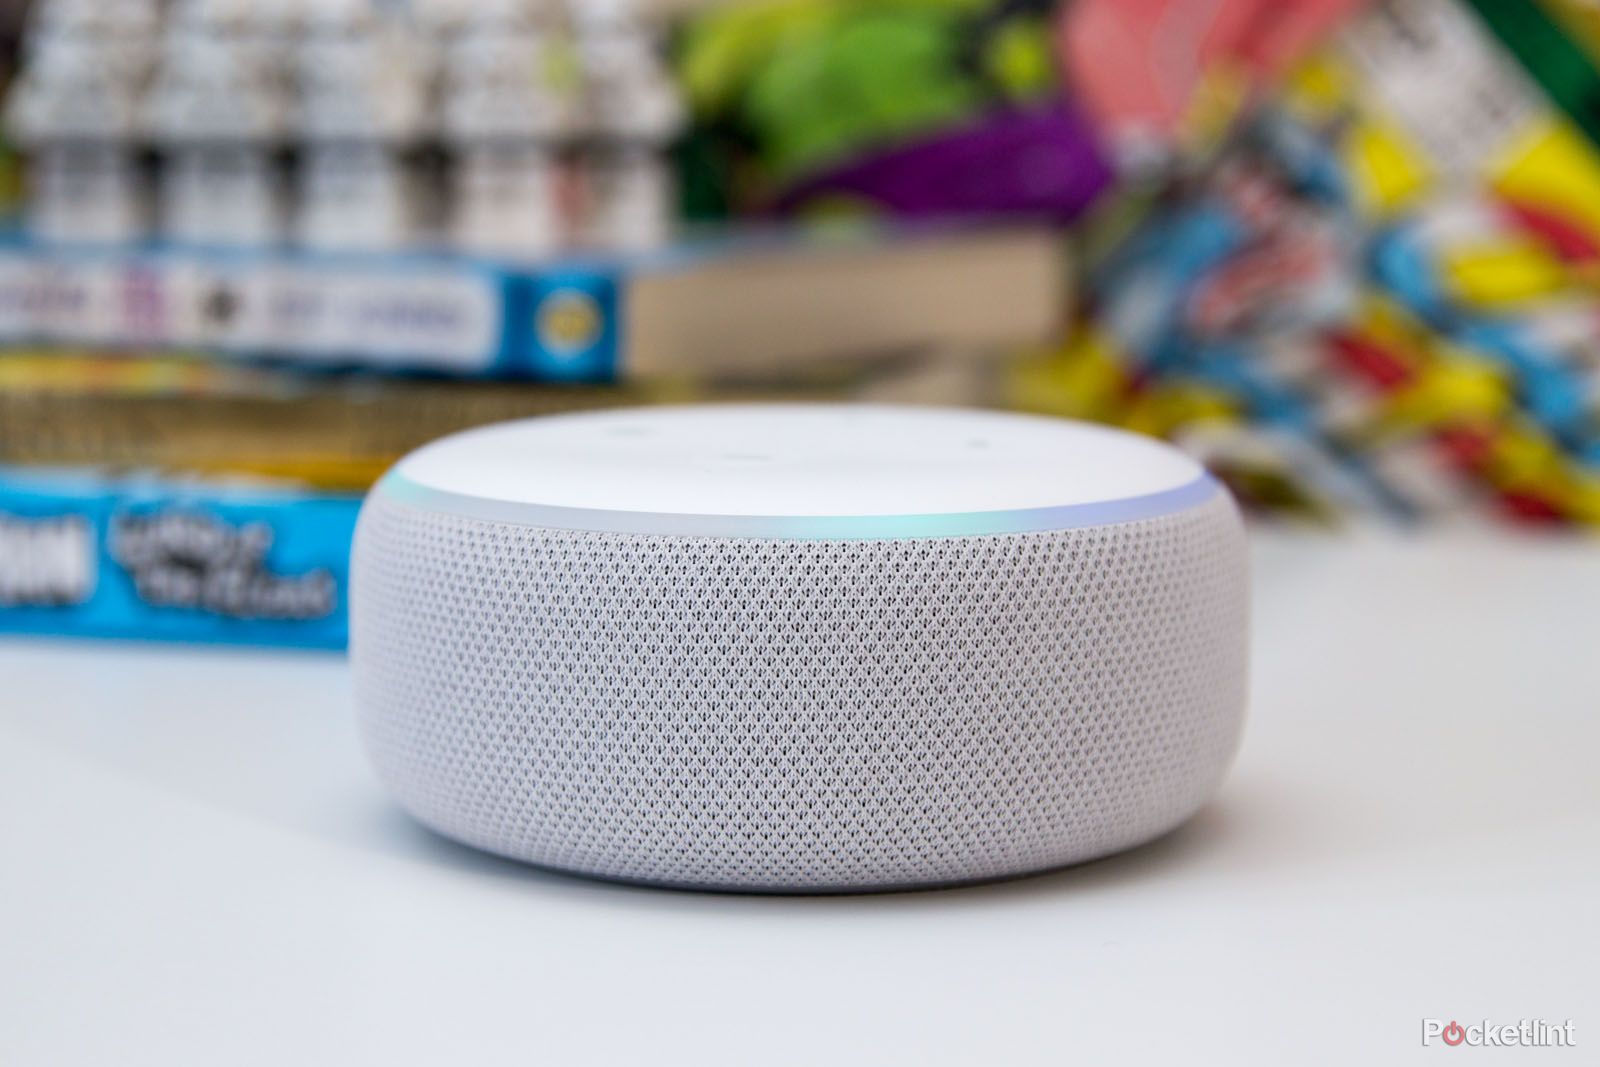 Interview Sonos CEO talks IKEA collaboration Google Assistant and future of company image 3